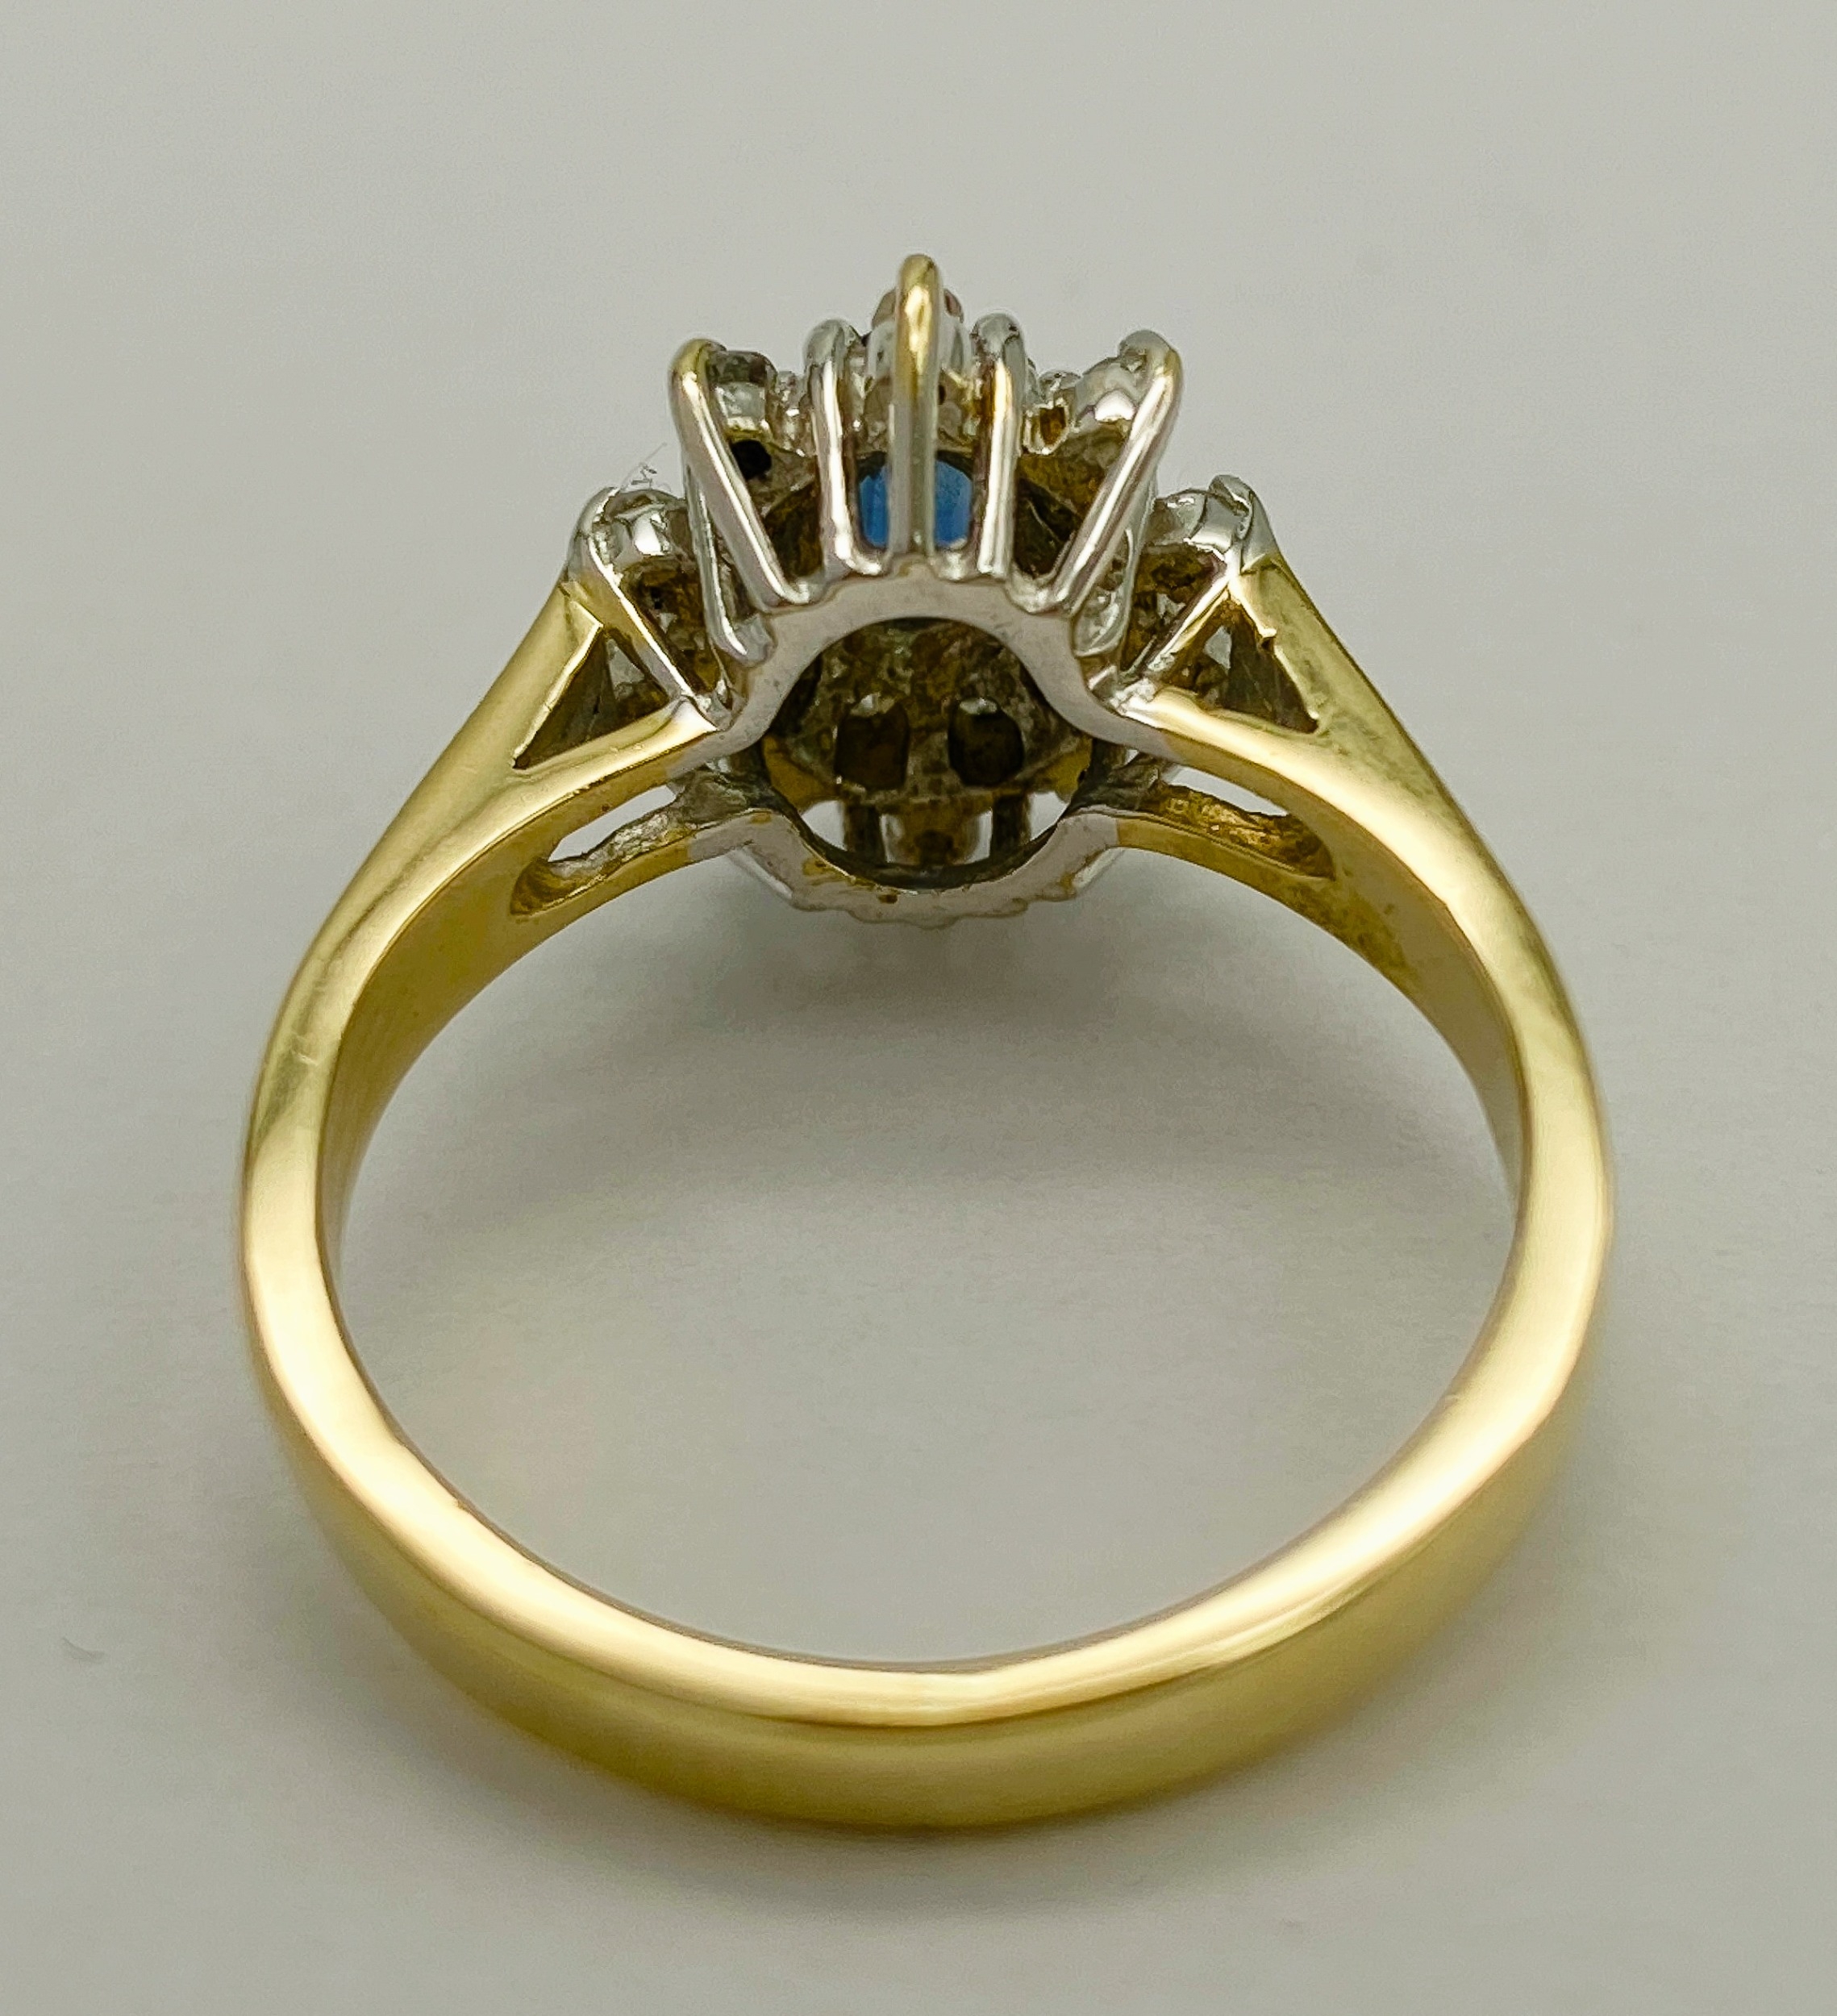 A 9K YELLOW GOLD DIAMOND & SAPPHIRE CLUSTER RING. Size J, 2.8g total weight. Ref: SC 8030 - Image 3 of 4